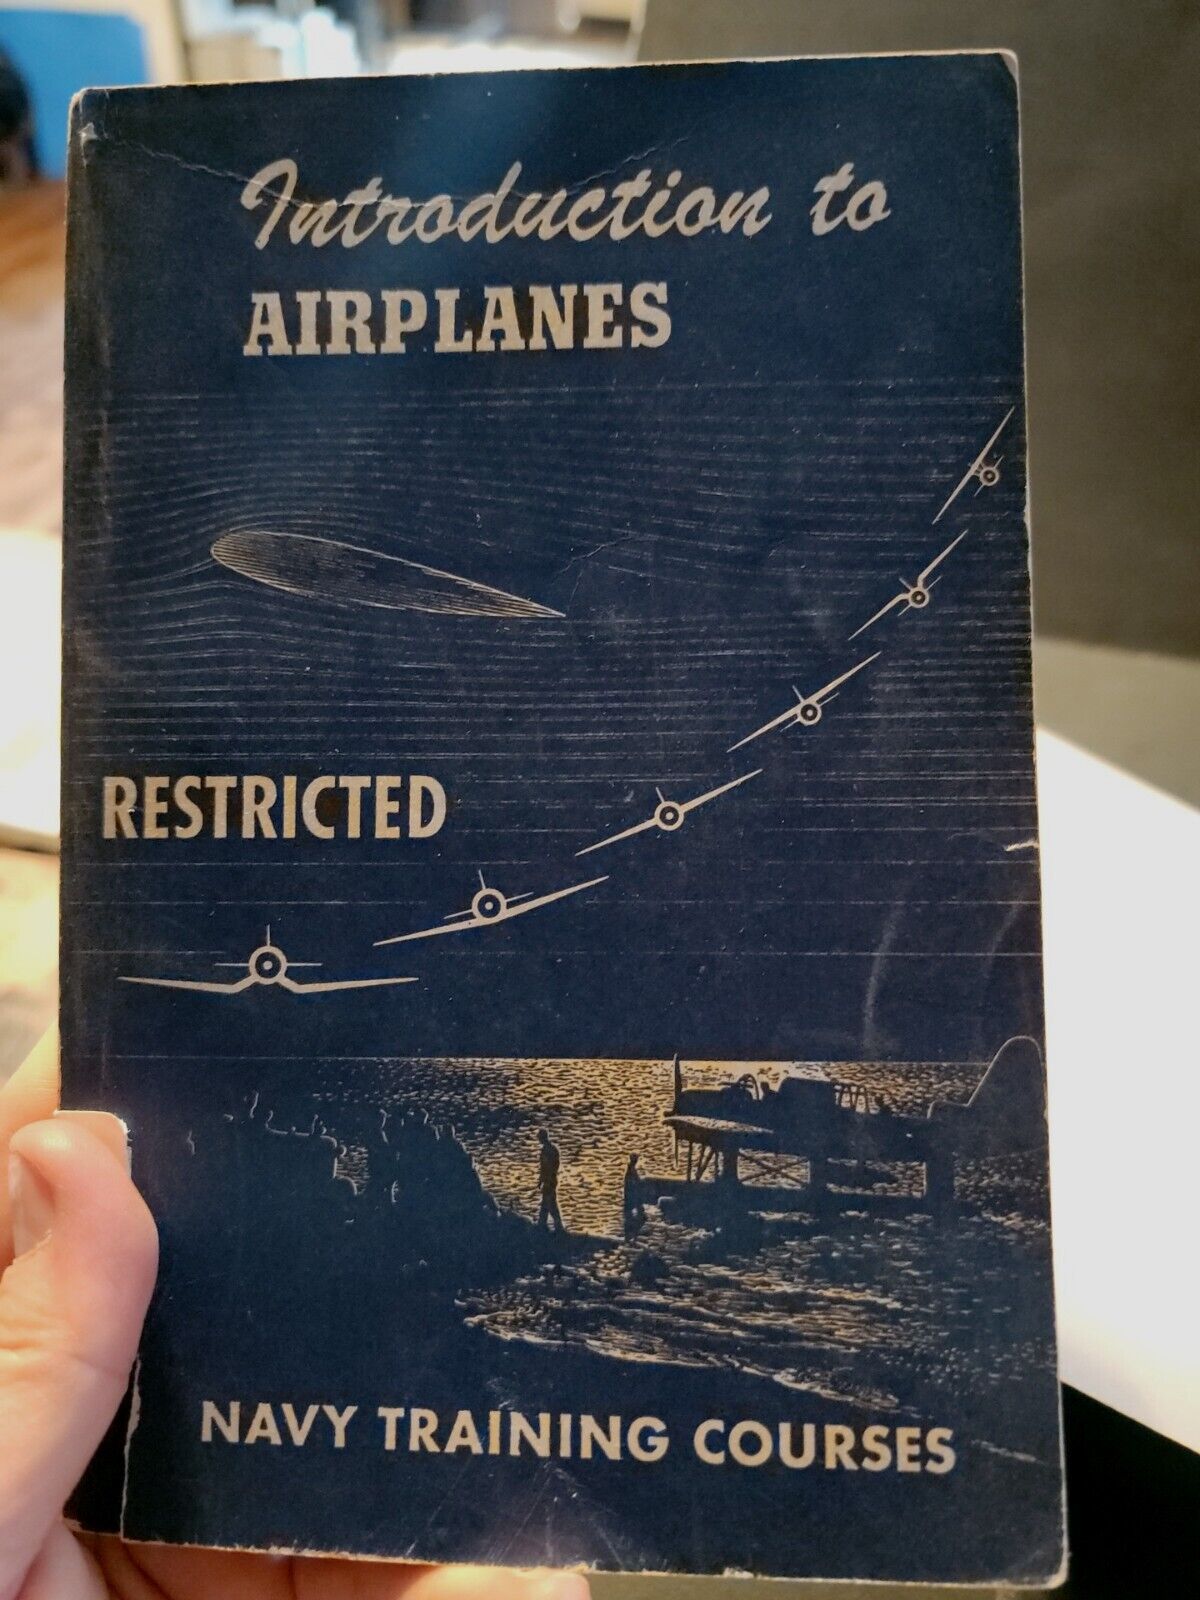 1944 WWII era Navy Training Courses Book Introduction to Airplanes Restricted